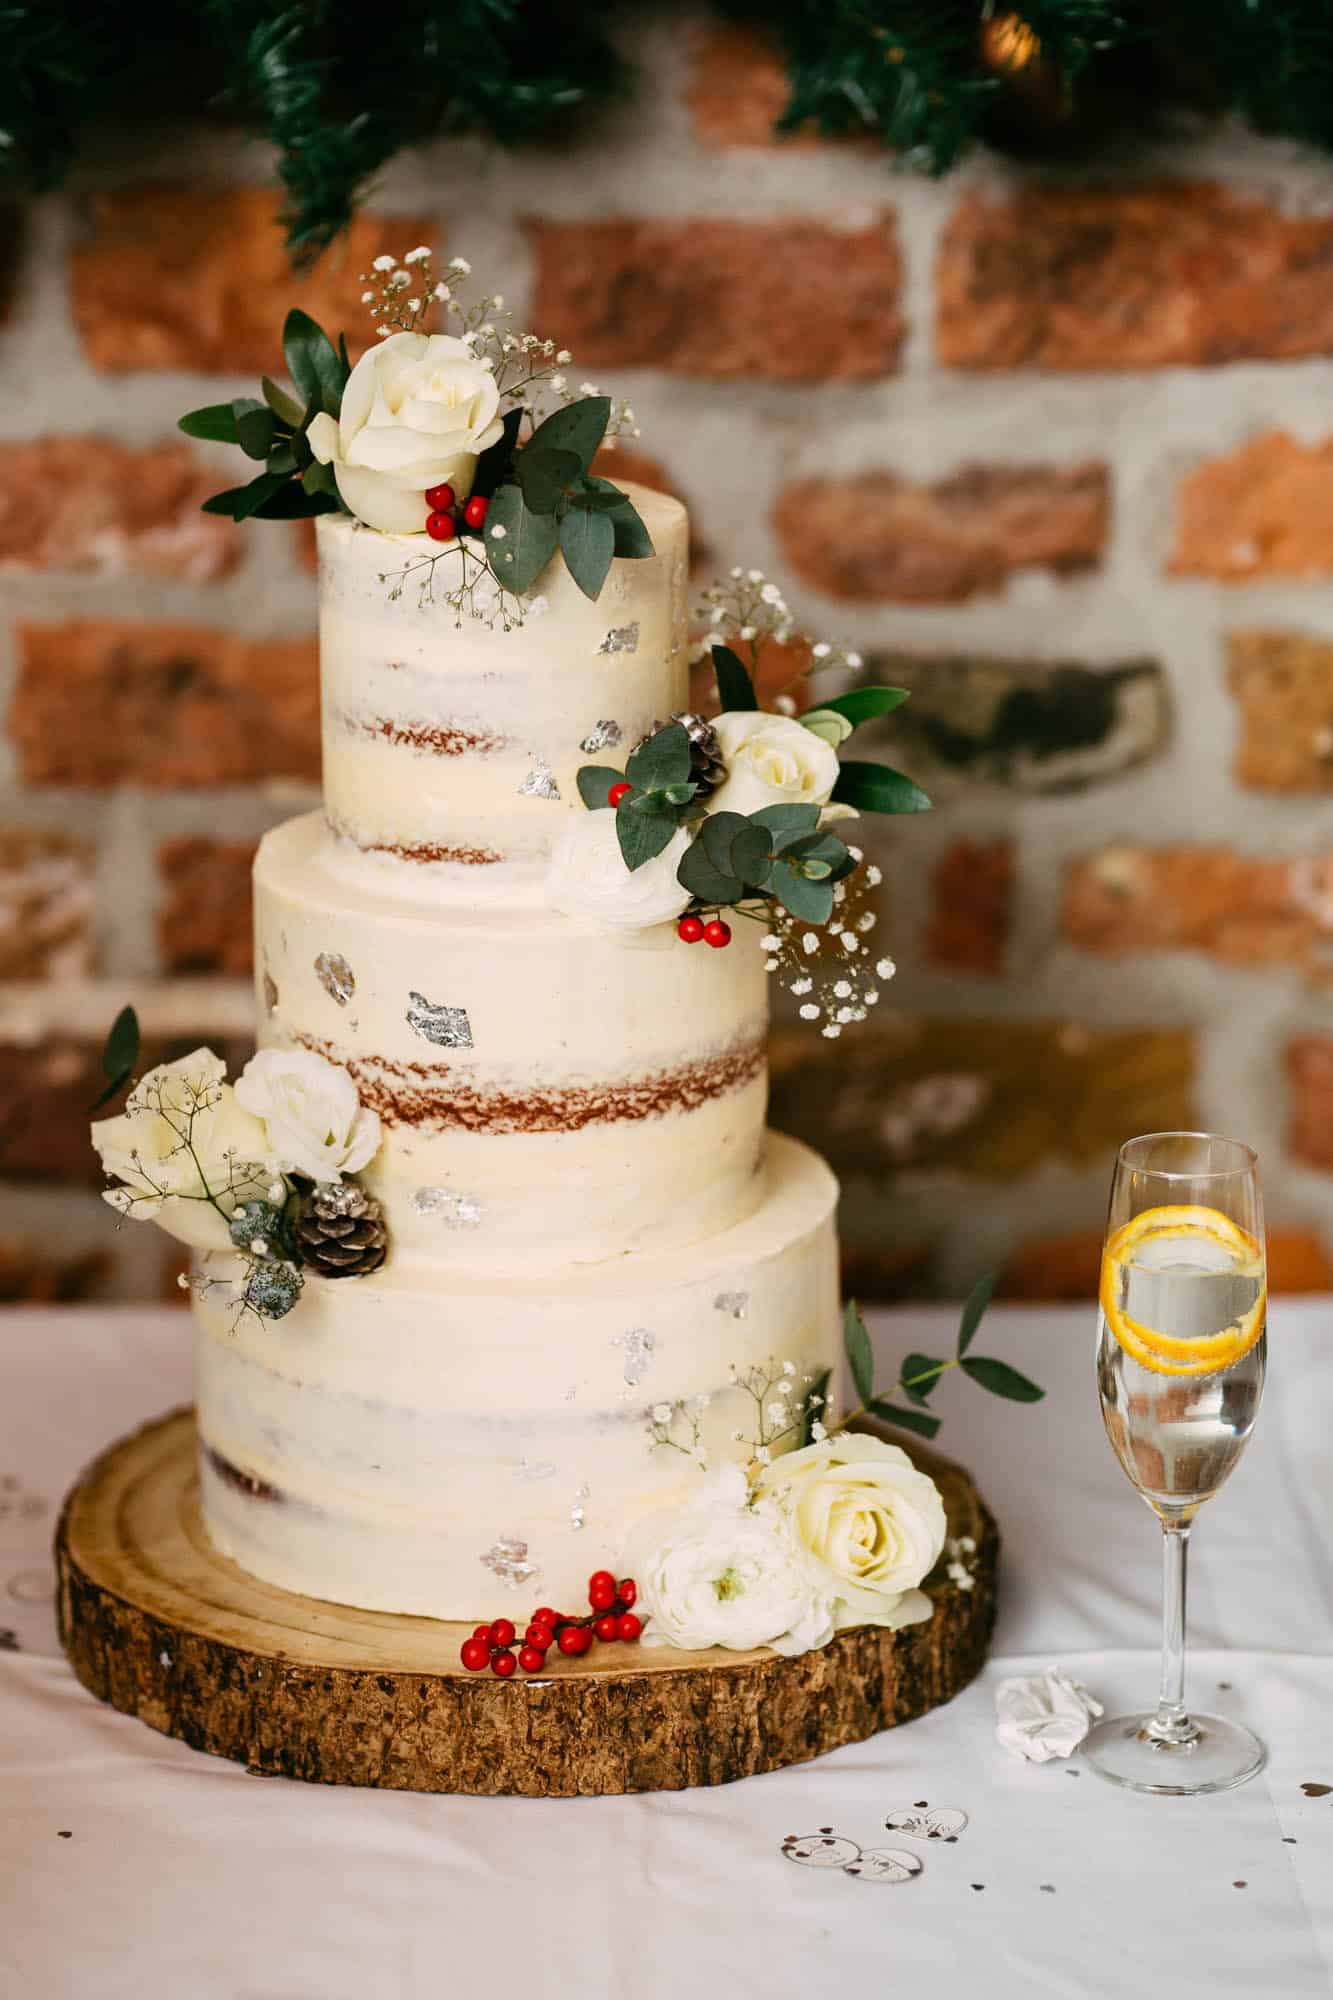 A wedding cake with flowers and a glass of wine.